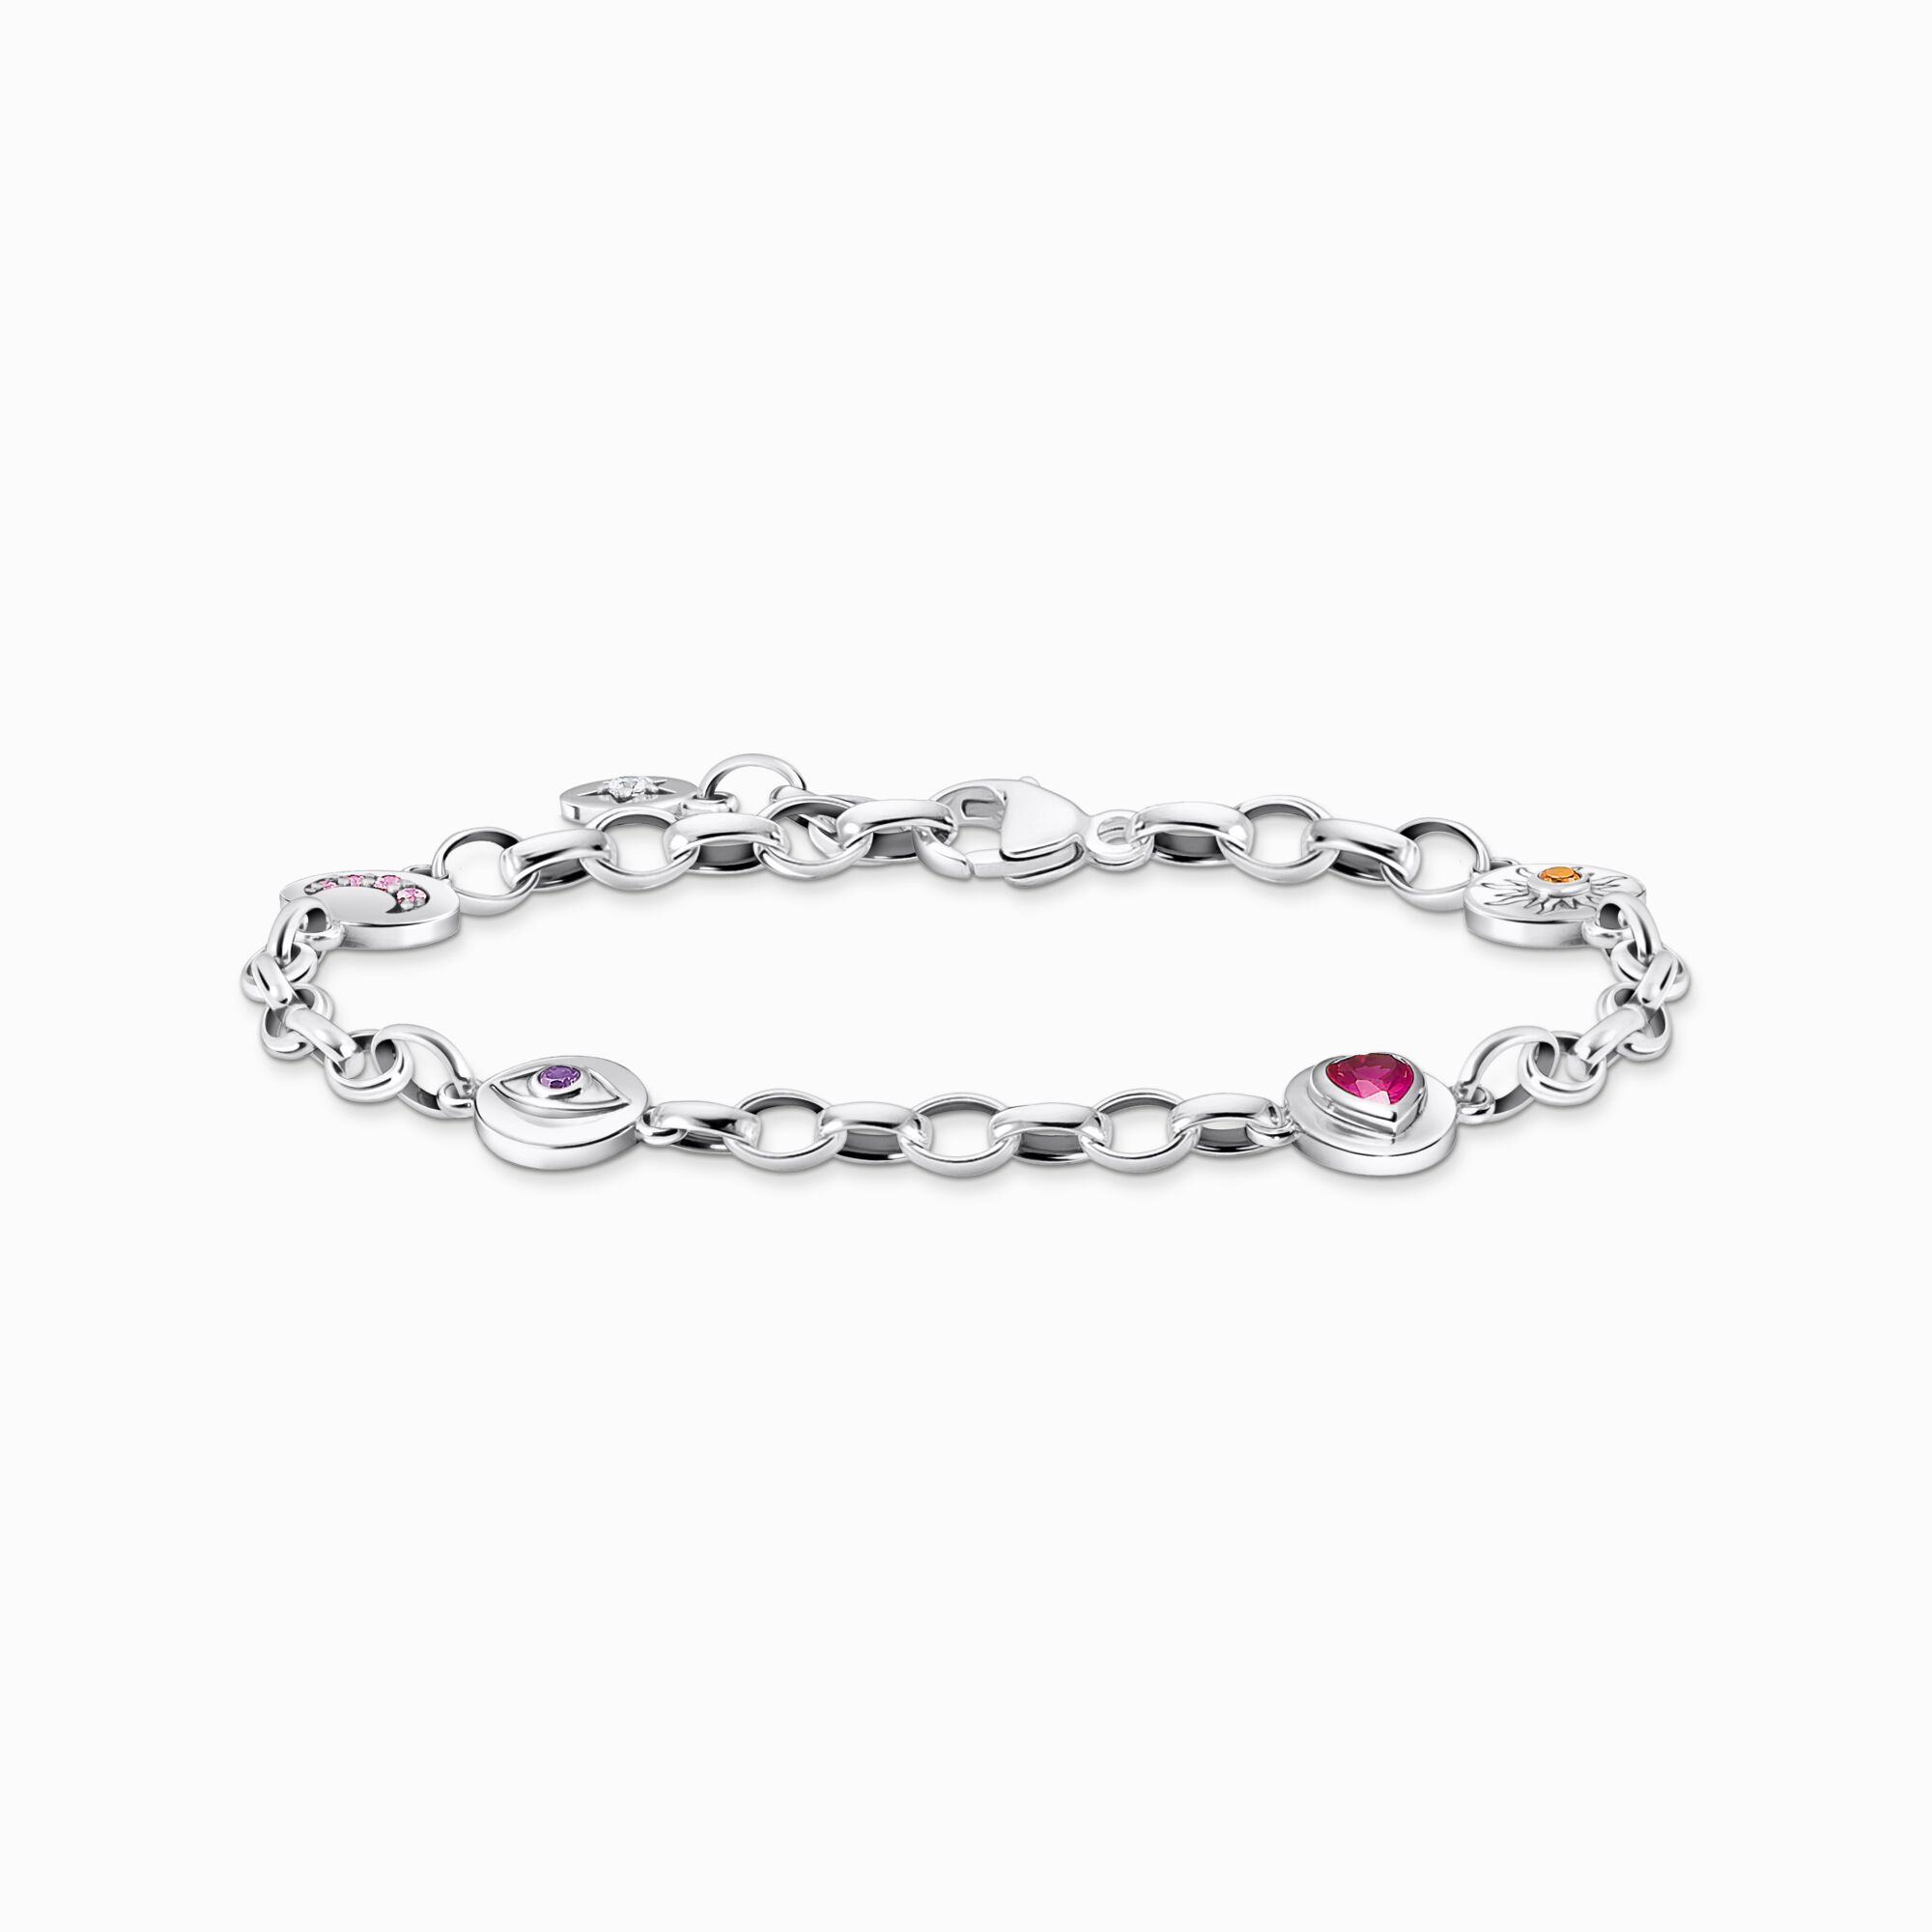 Silver blackened bracelet with round elements and various stones from the  collection in the THOMAS SABO online store